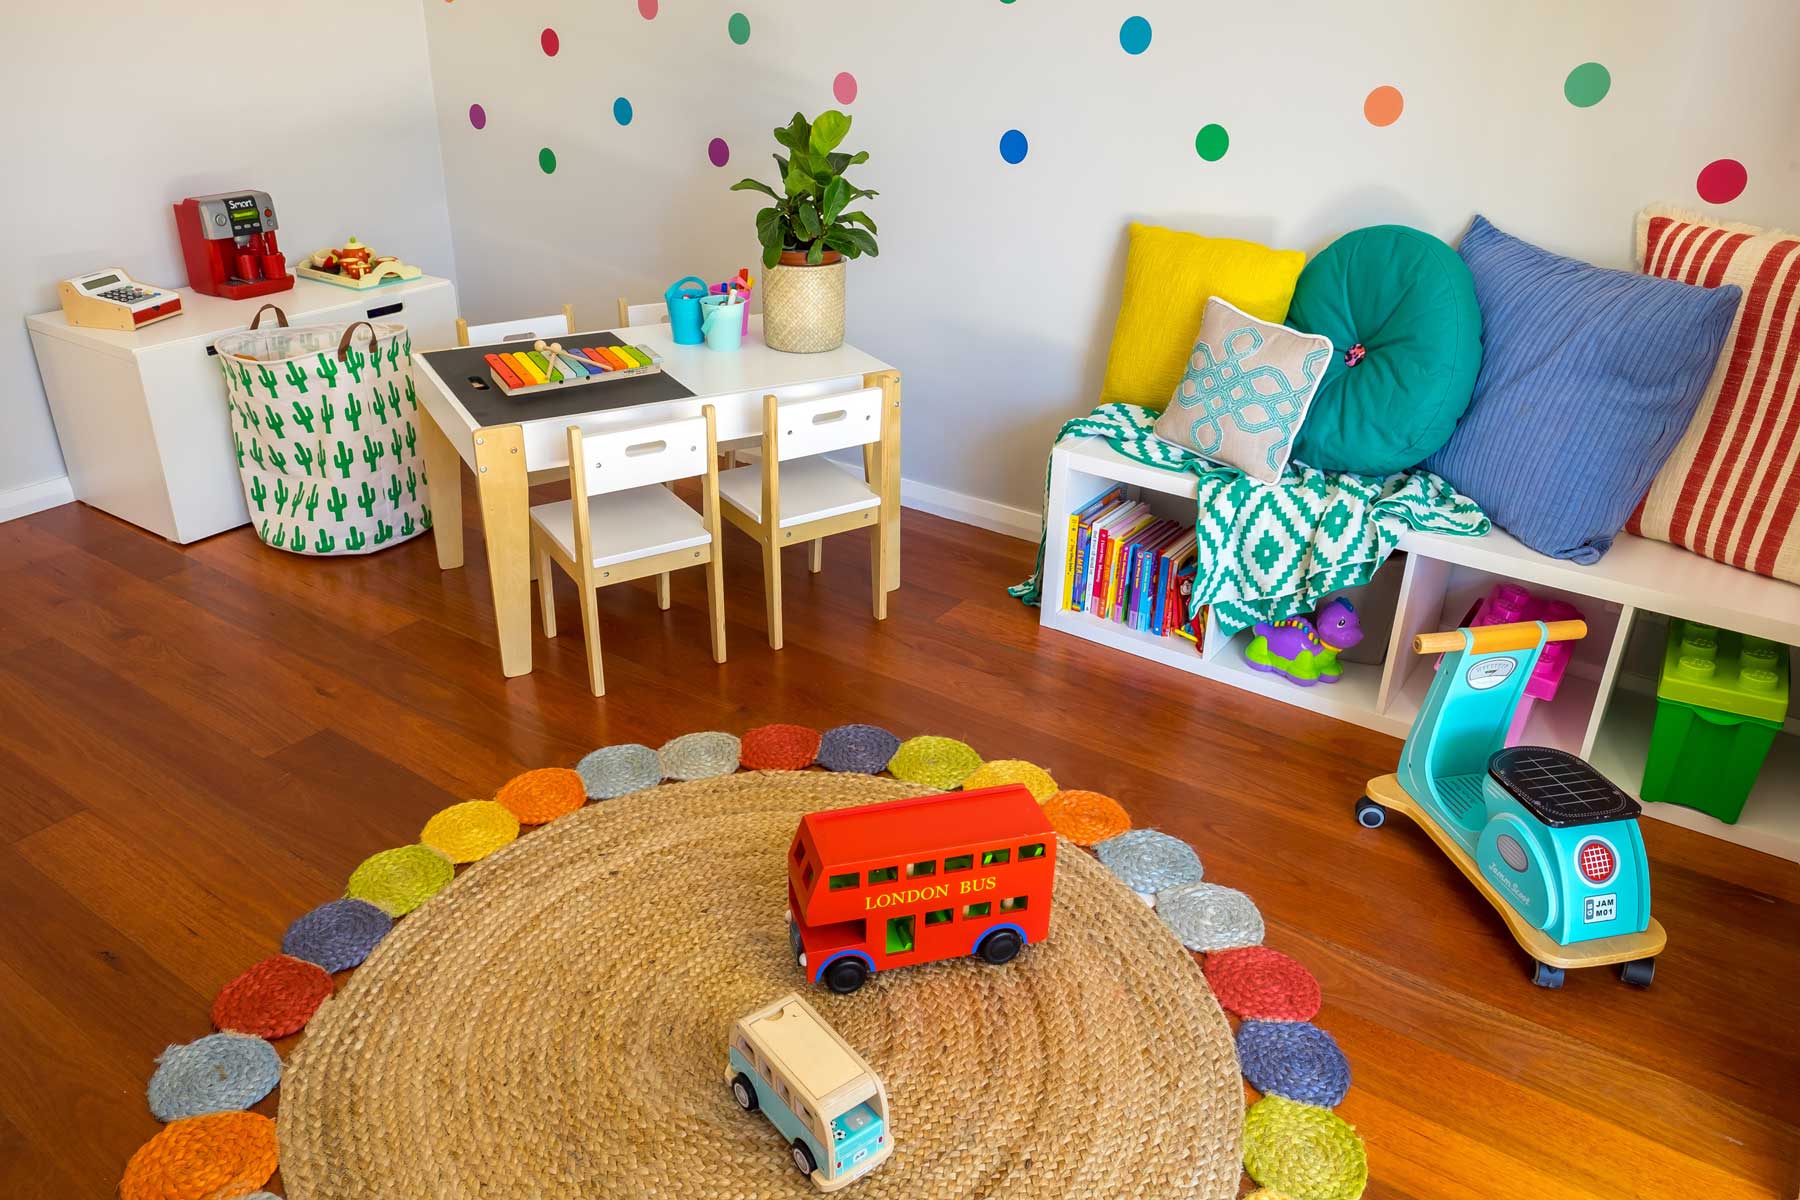  Childrens Playroom Ideas for Large Space